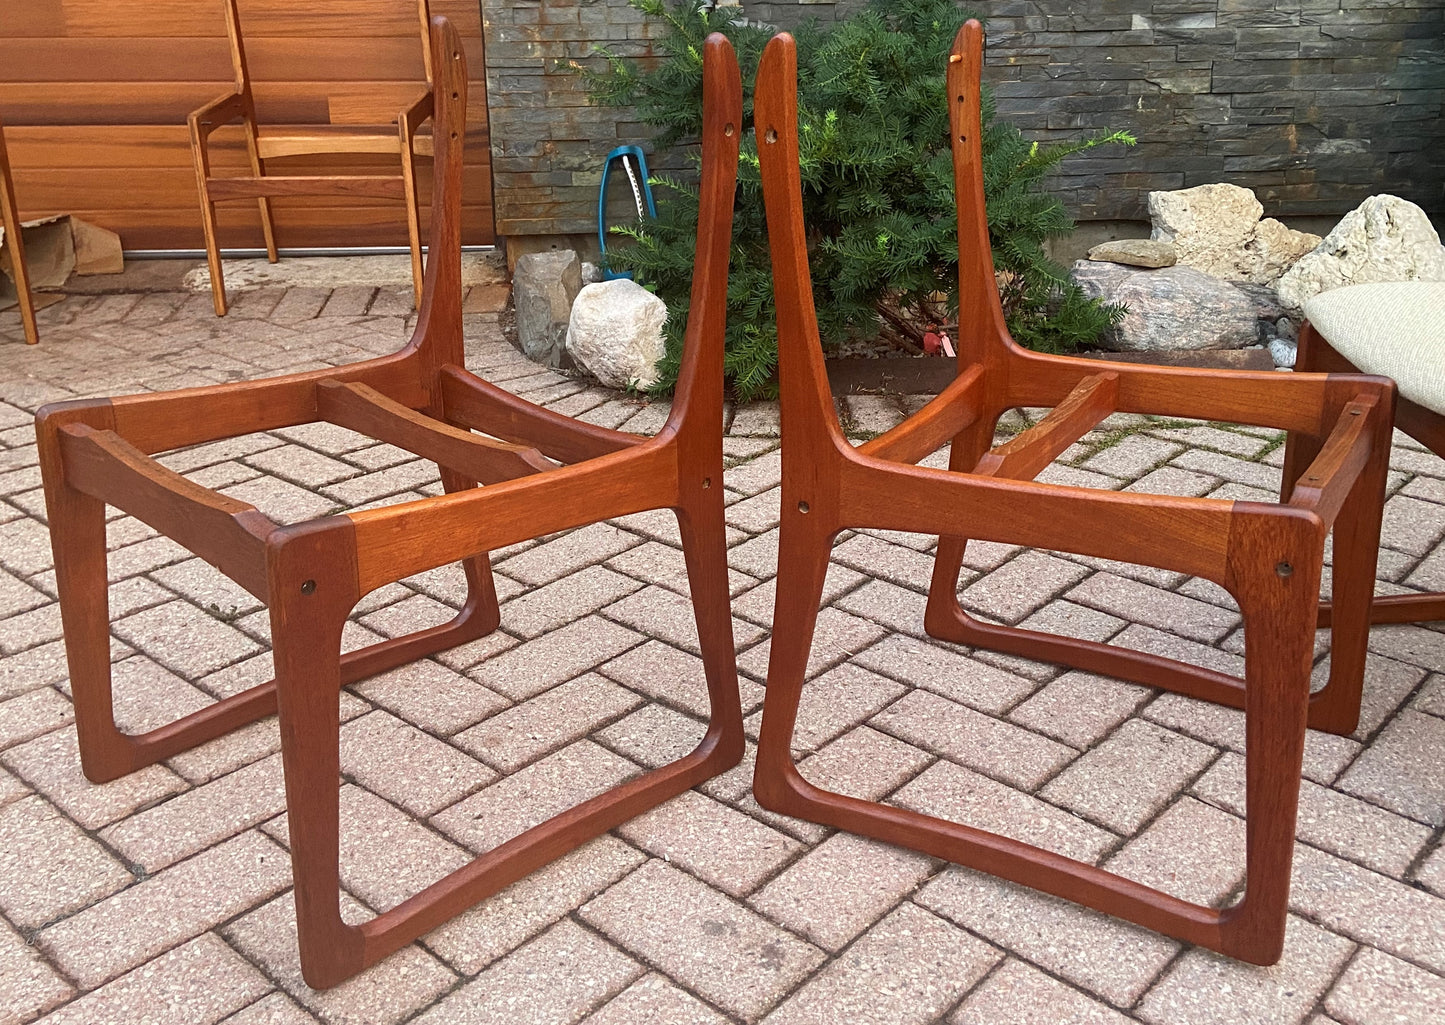 On Hold***4 REFINISHED REUPHOLSTERED Mid Century Modern Teak Chairs by RS